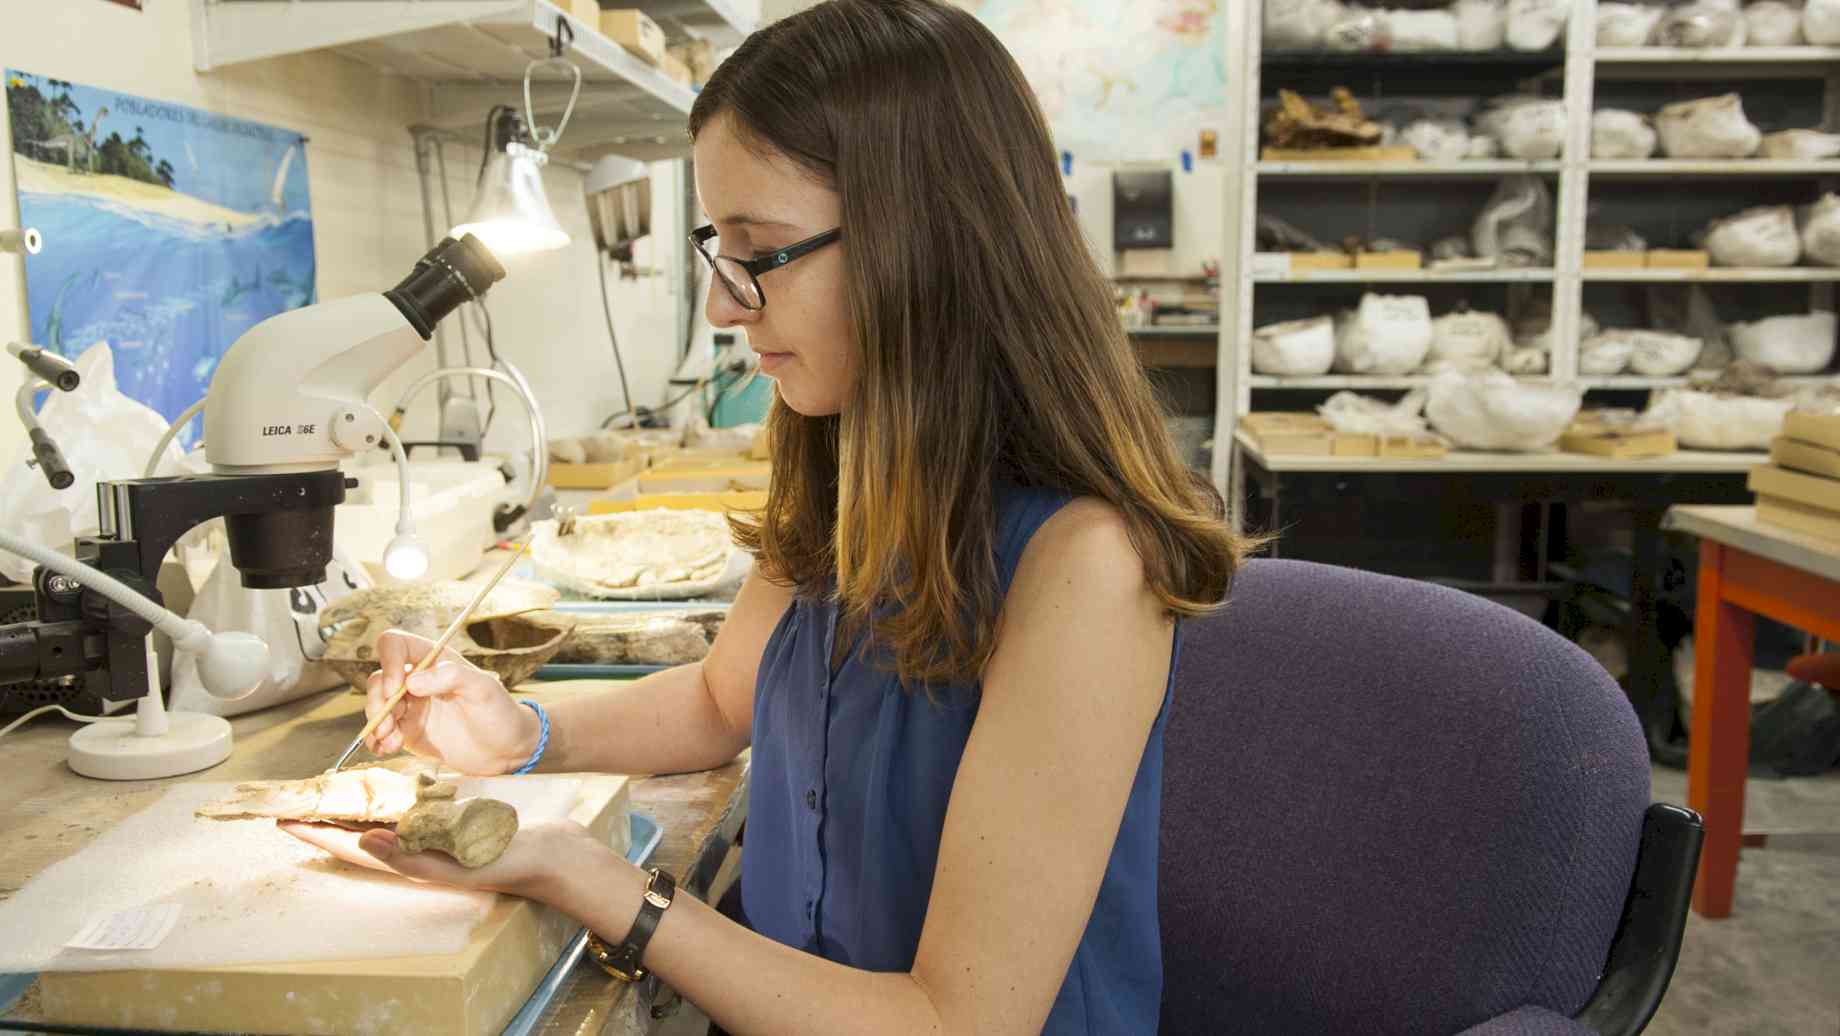 Student Kristen Conwell cleans fossils at the Florida Museum of Natural History. [Alt text: A student sitting in a chair holds a fossil under several lamps, cleaning it with a brush. Other fossils are displayed around her.]